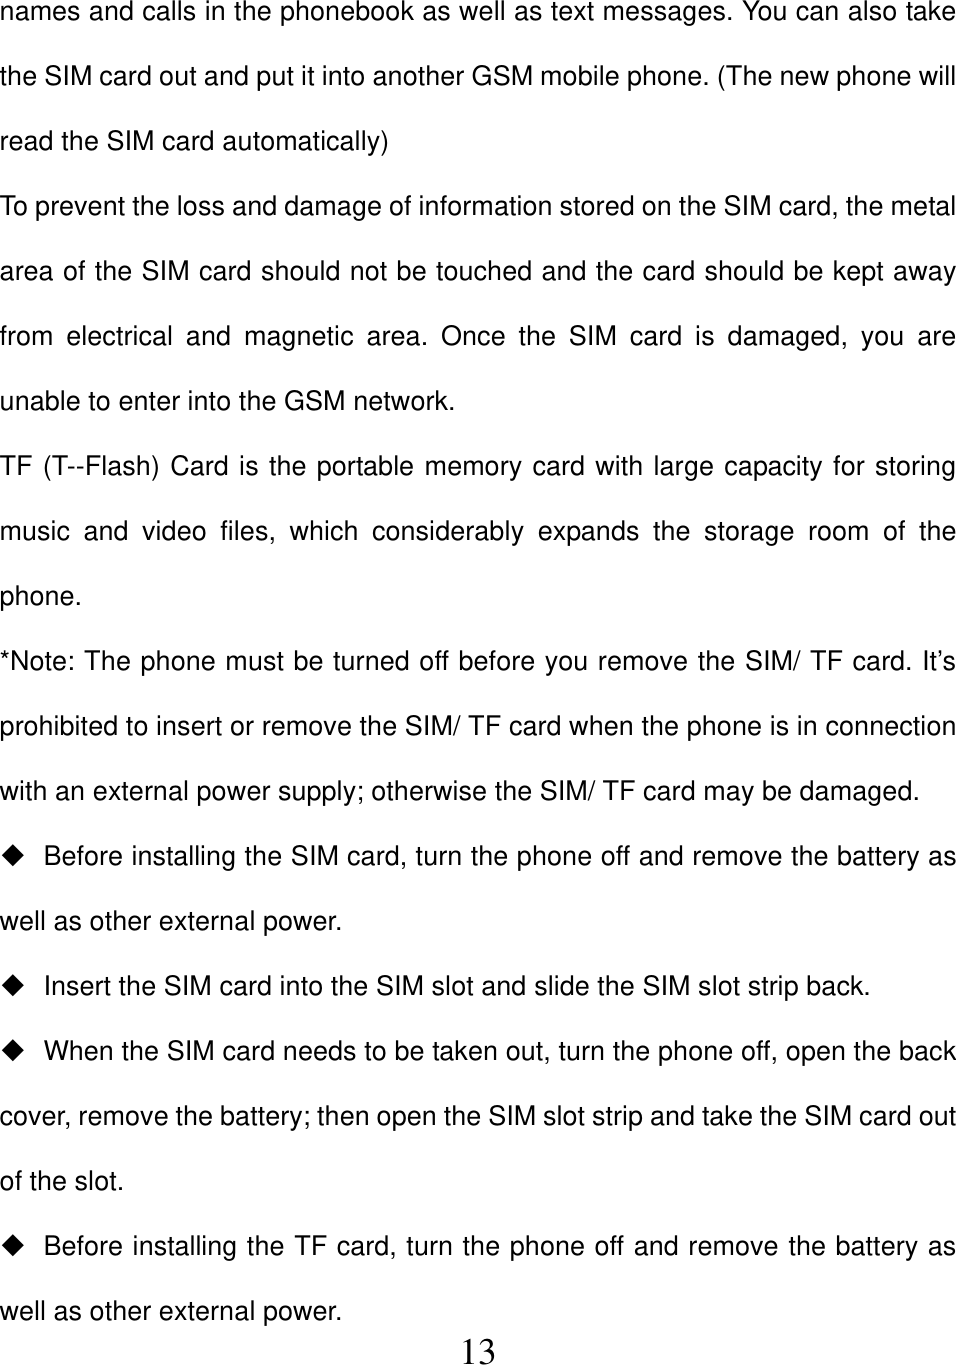  13names and calls in the phonebook as well as text messages. You can also take the SIM card out and put it into another GSM mobile phone. (The new phone will read the SIM card automatically) To prevent the loss and damage of information stored on the SIM card, the metal area of the SIM card should not be touched and the card should be kept away from electrical and magnetic area. Once the SIM card is damaged, you are unable to enter into the GSM network. TF (T--Flash) Card is the portable memory card with large capacity for storing music and video files, which considerably expands the storage room of the phone. *Note: The phone must be turned off before you remove the SIM/ TF card. It’s prohibited to insert or remove the SIM/ TF card when the phone is in connection with an external power supply; otherwise the SIM/ TF card may be damaged.   Before installing the SIM card, turn the phone off and remove the battery as well as other external power.   Insert the SIM card into the SIM slot and slide the SIM slot strip back.   When the SIM card needs to be taken out, turn the phone off, open the back cover, remove the battery; then open the SIM slot strip and take the SIM card out of the slot.   Before installing the TF card, turn the phone off and remove the battery as well as other external power. 